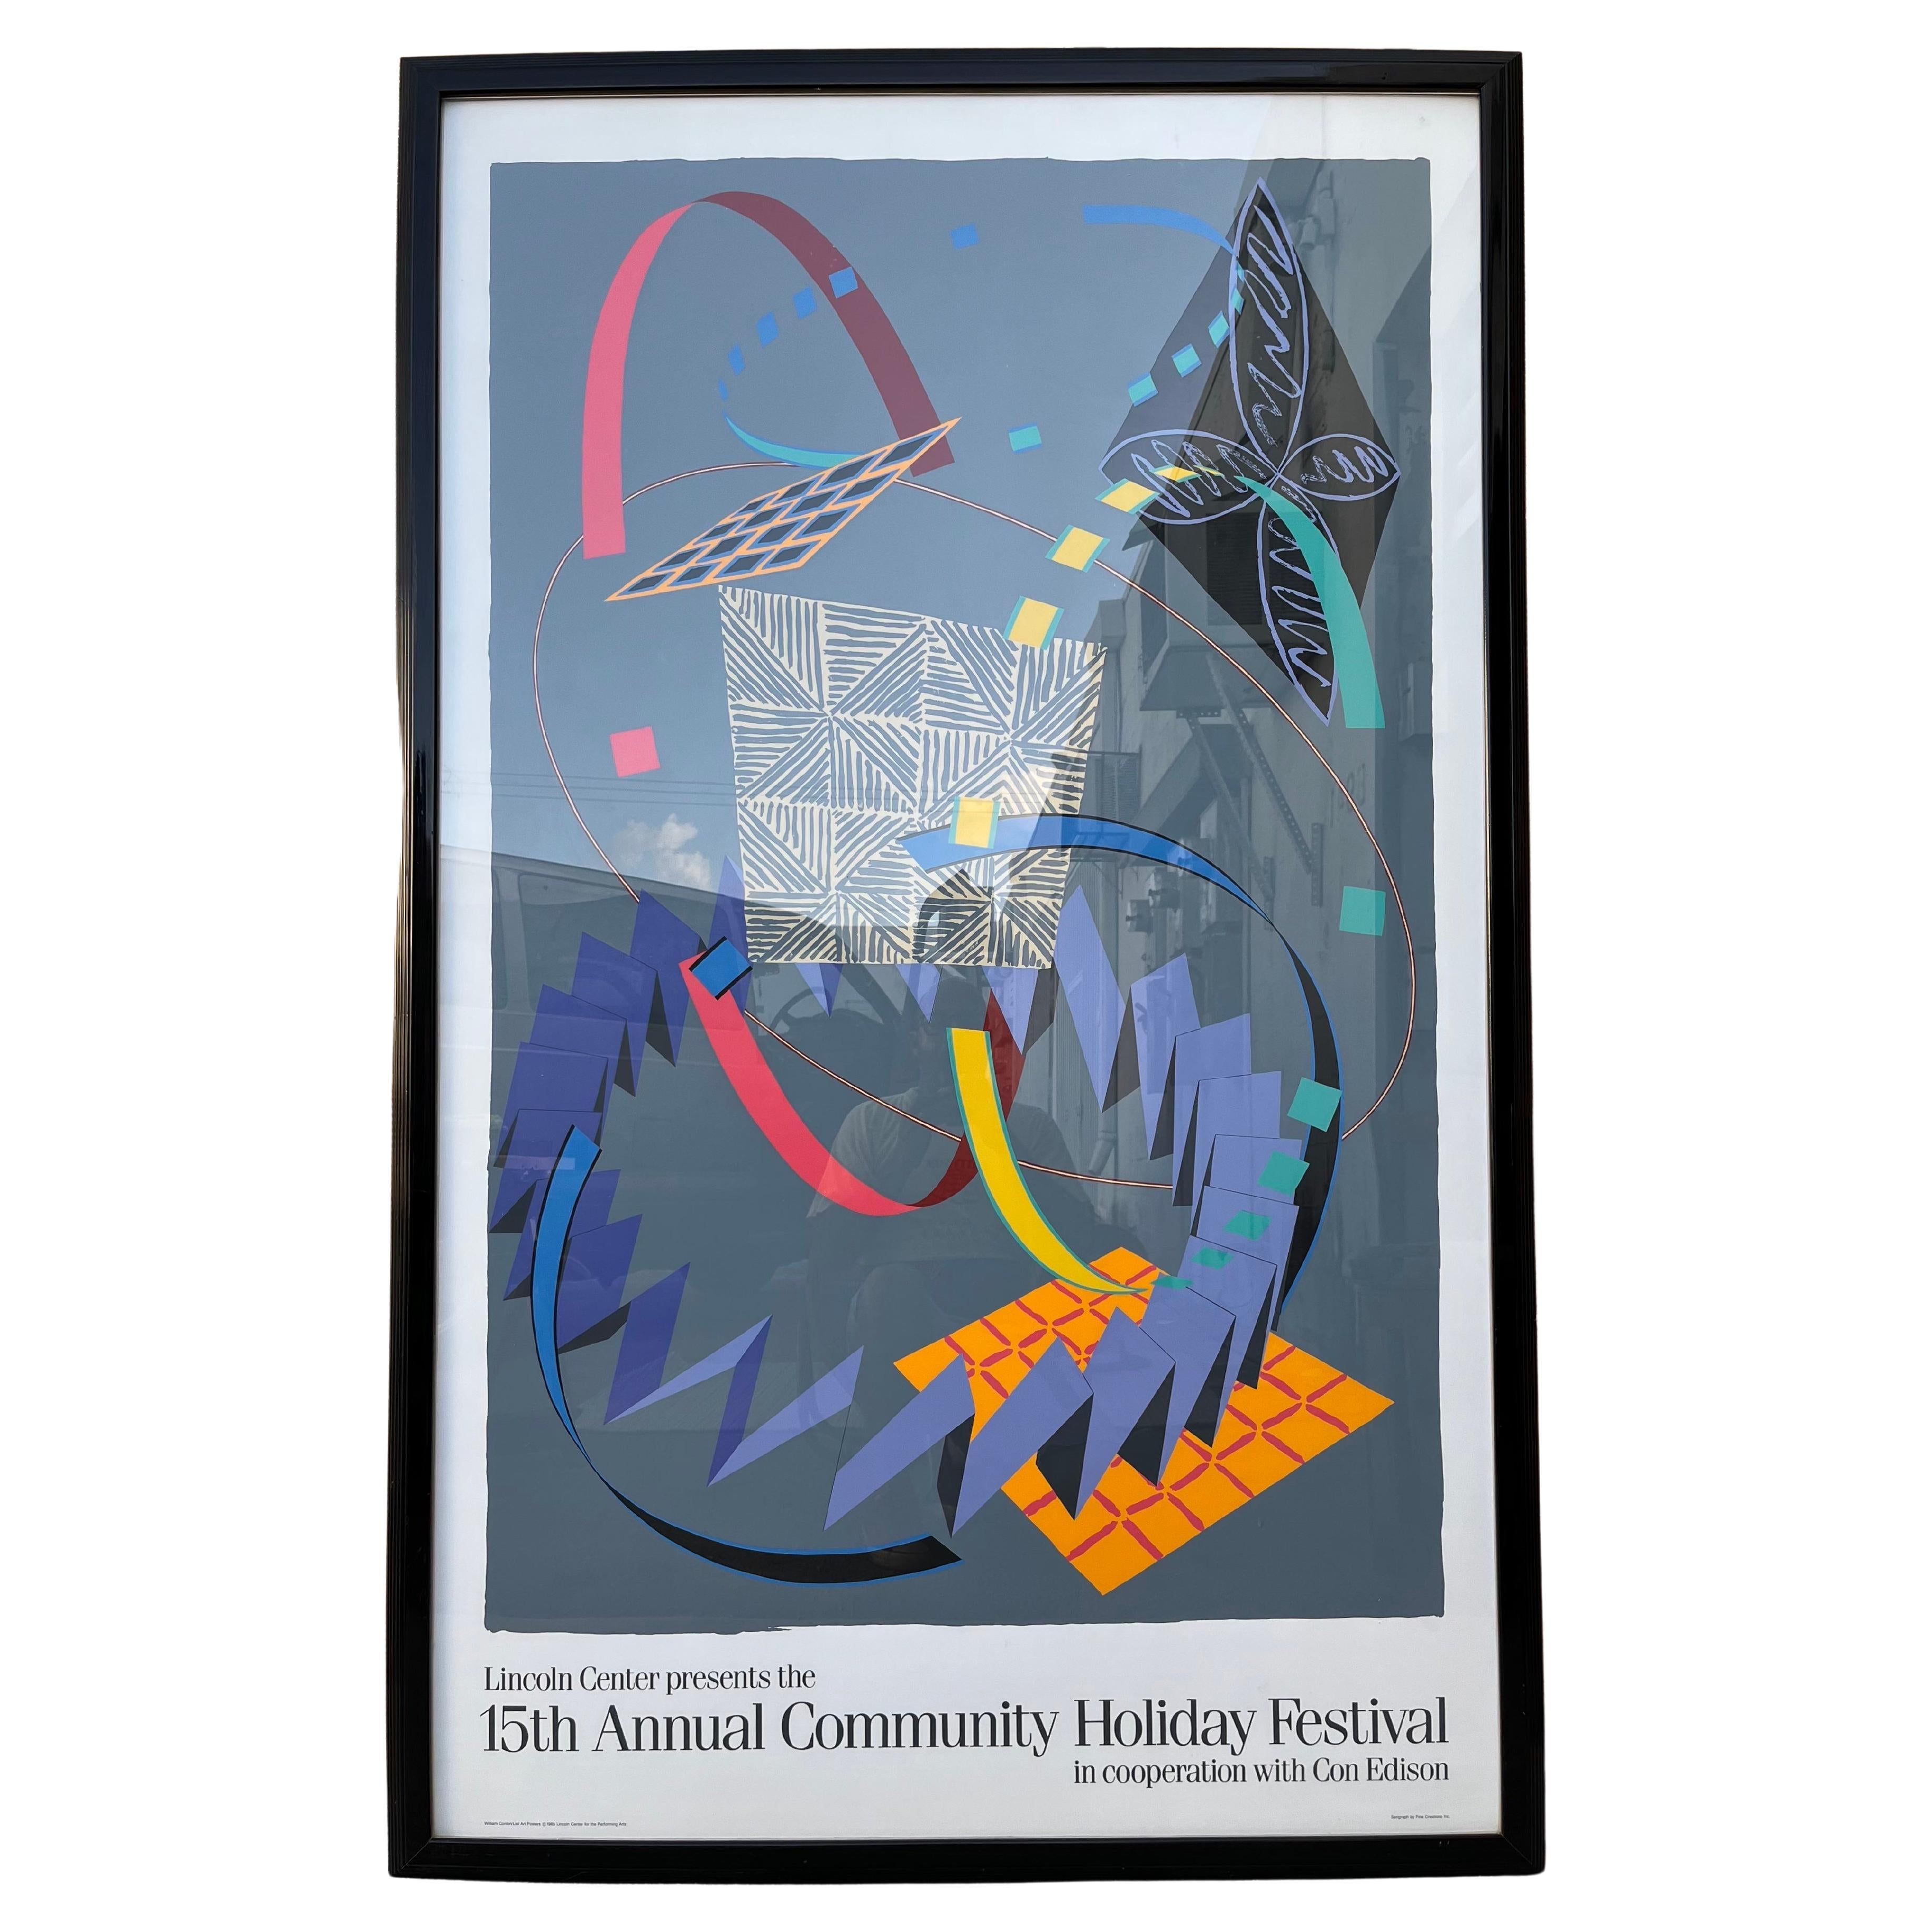 Large Scale, 15th Annual Community Holiday Festival Lincoln Center Framed Serigraph by American artist William Conlon. Dated 1985. 
Professionally framed and protected with plexiglass. 

In excellent original condition with very minor signs of